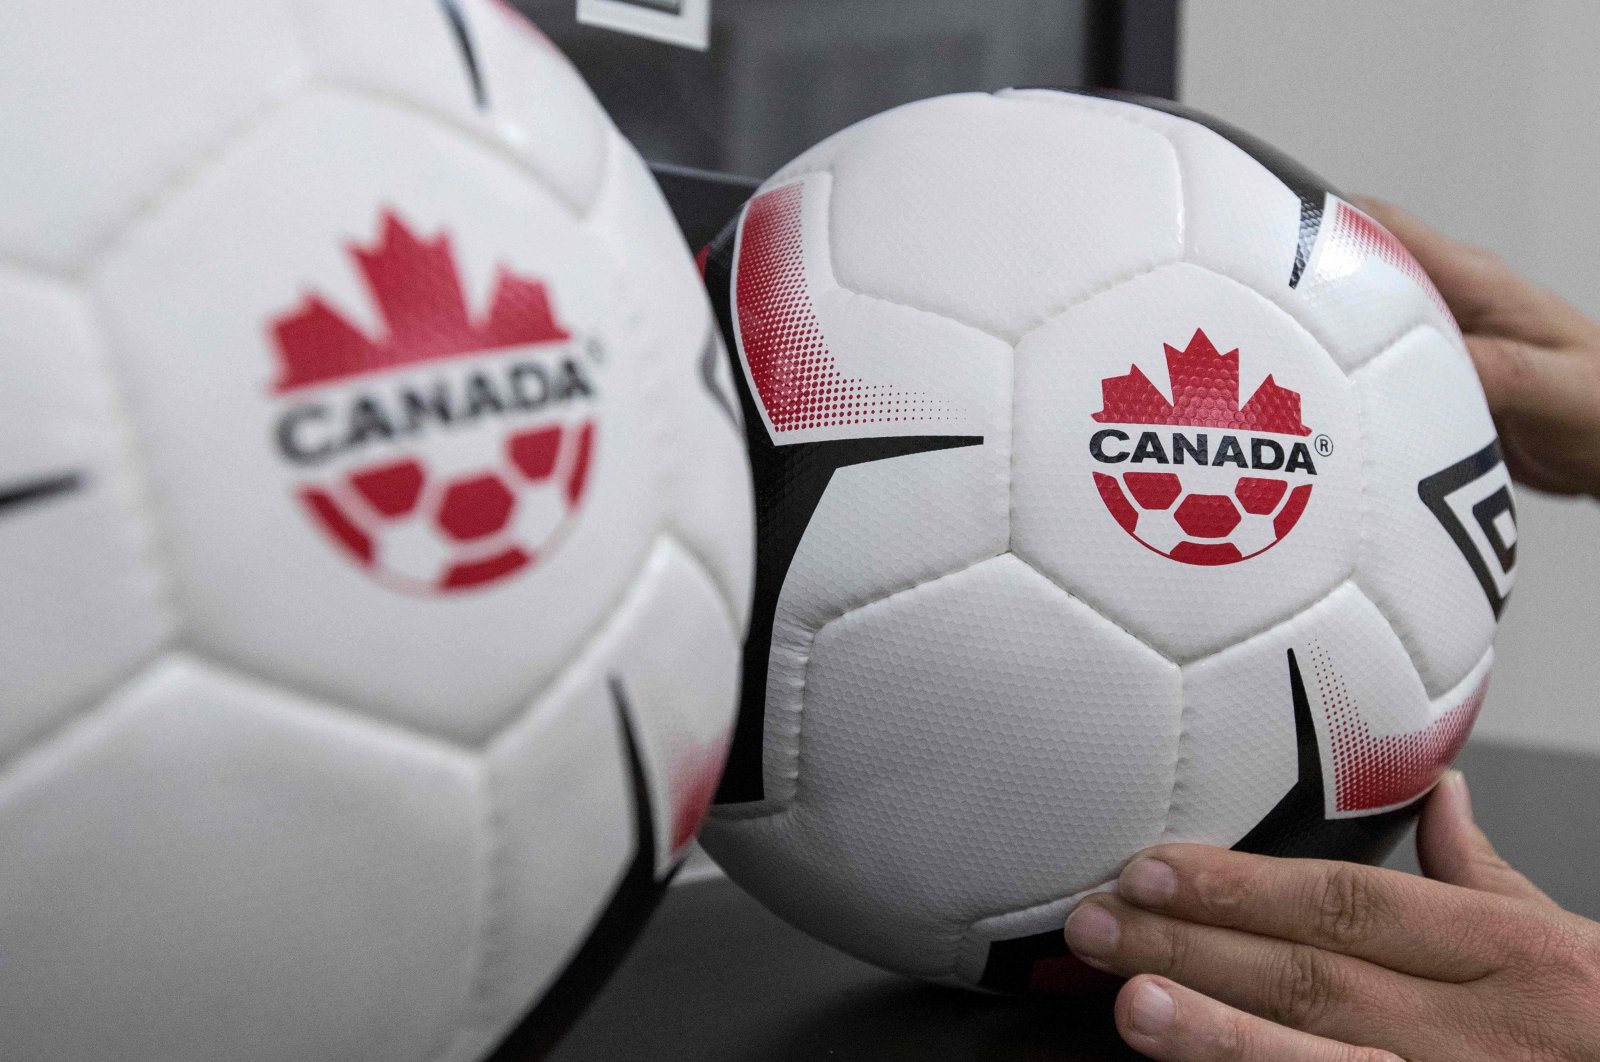 A staff adjusts balls at Soccer Canada Headquarters in Ottawa, Ontario, June 13, 2018. (AFP Photo)